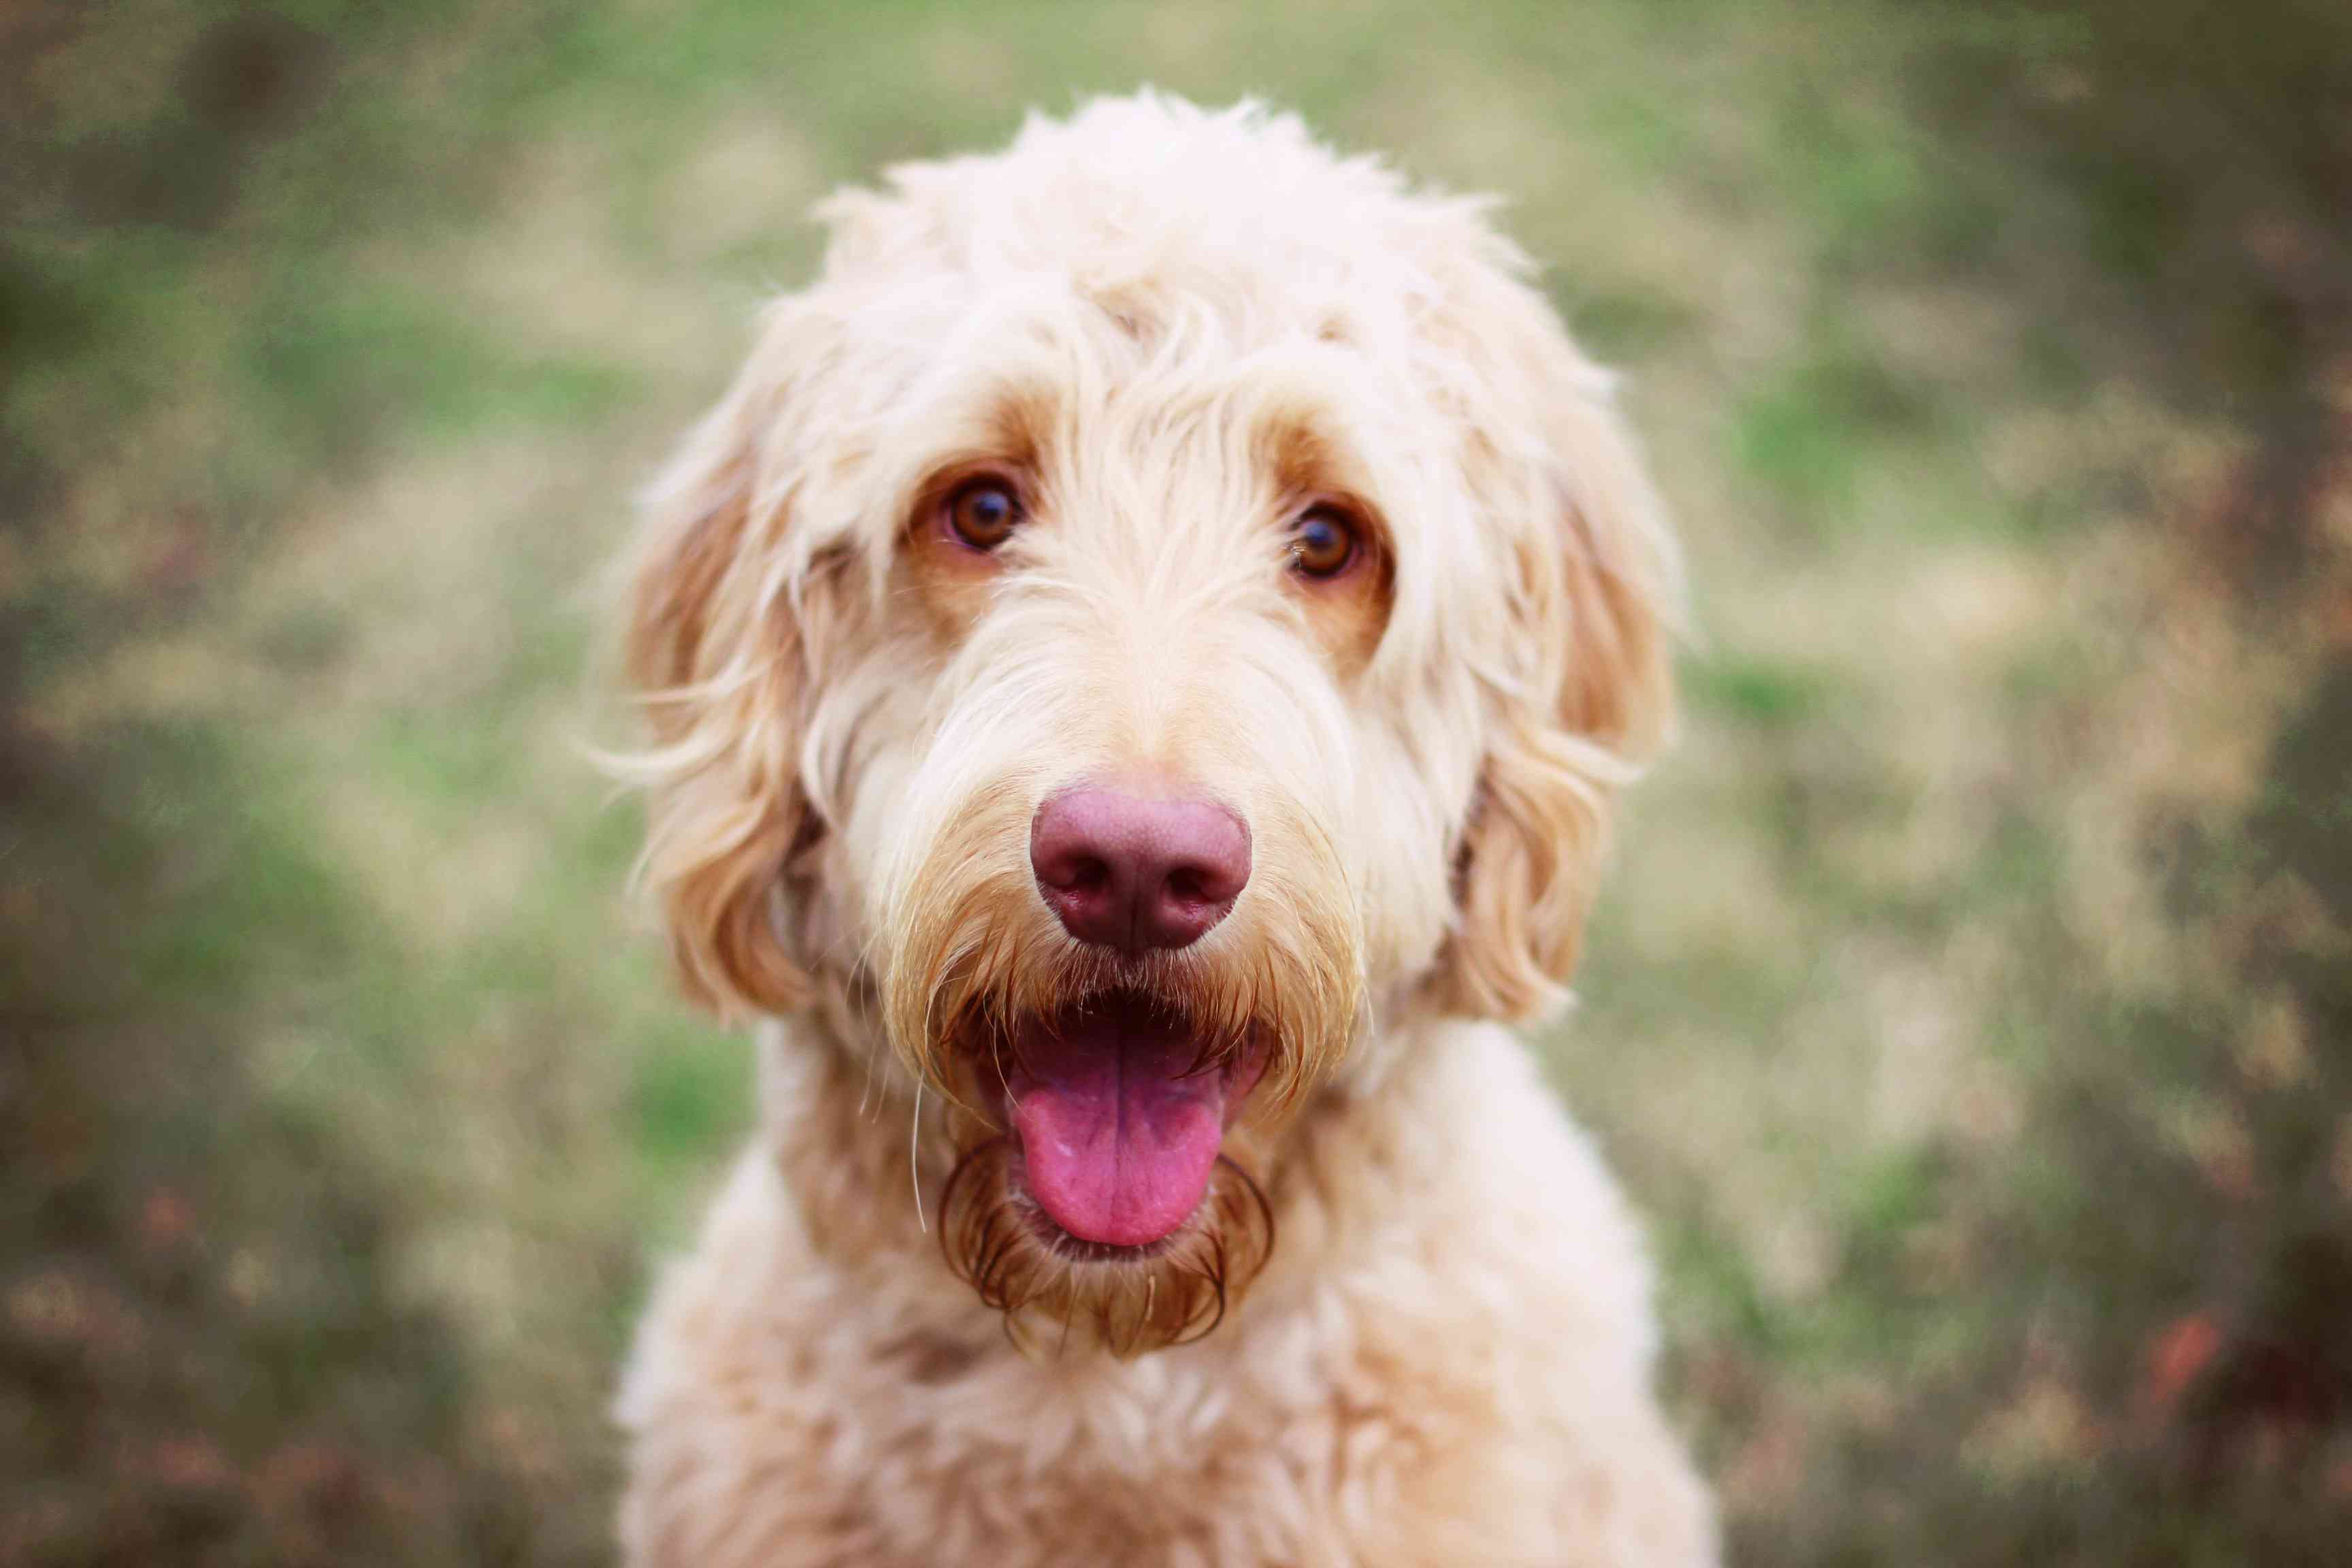 A Goldendoodle looking at the camera.